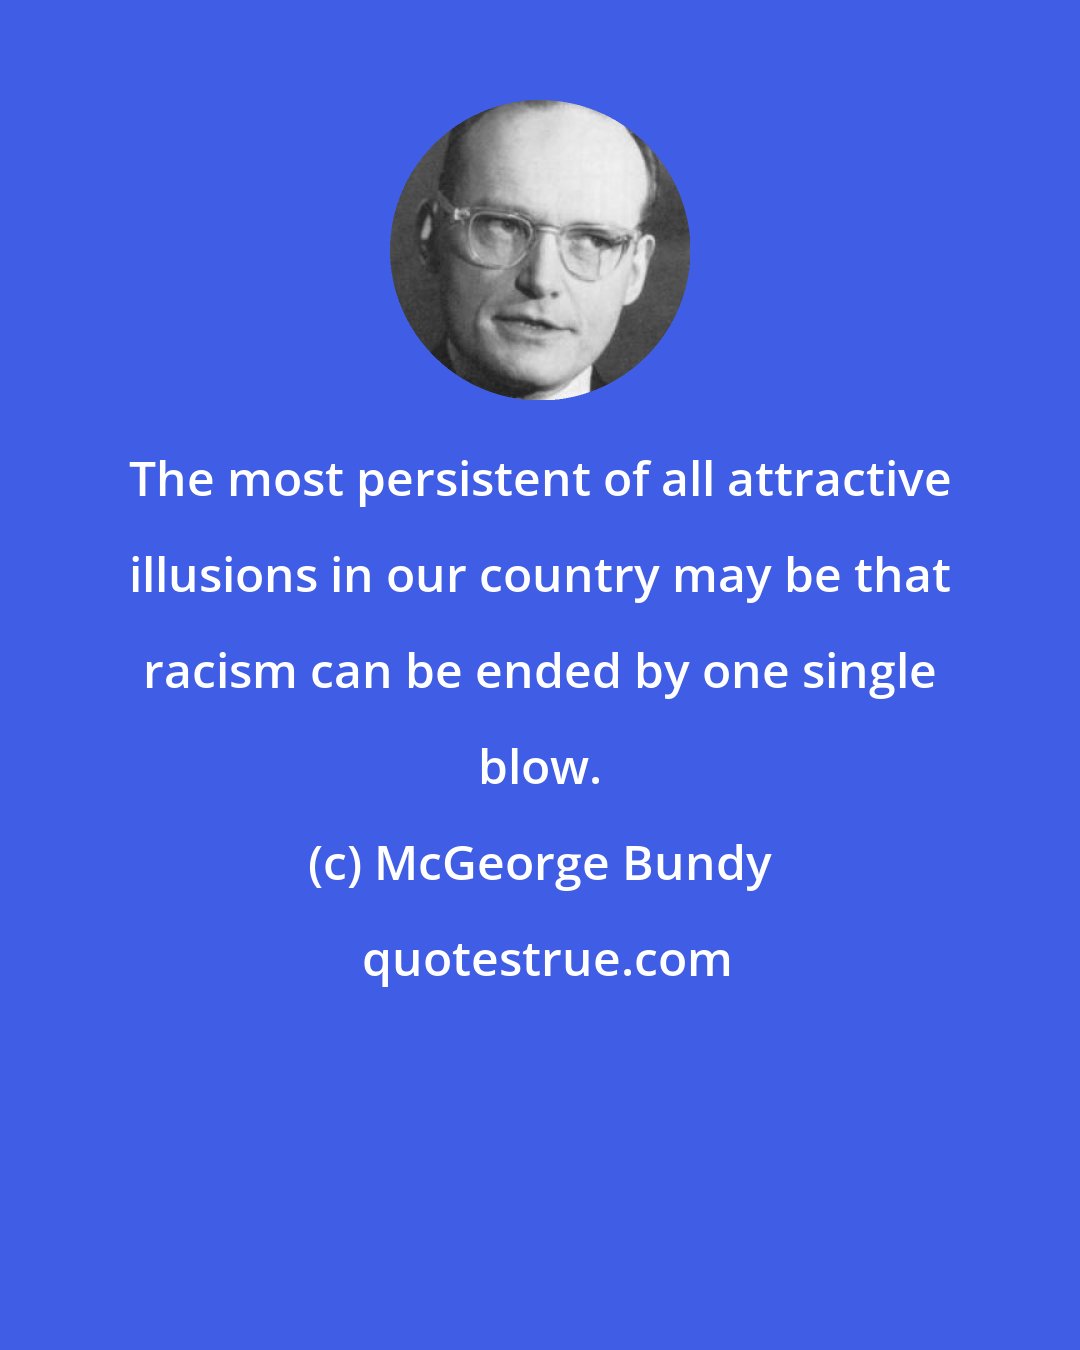 McGeorge Bundy: The most persistent of all attractive illusions in our country may be that racism can be ended by one single blow.